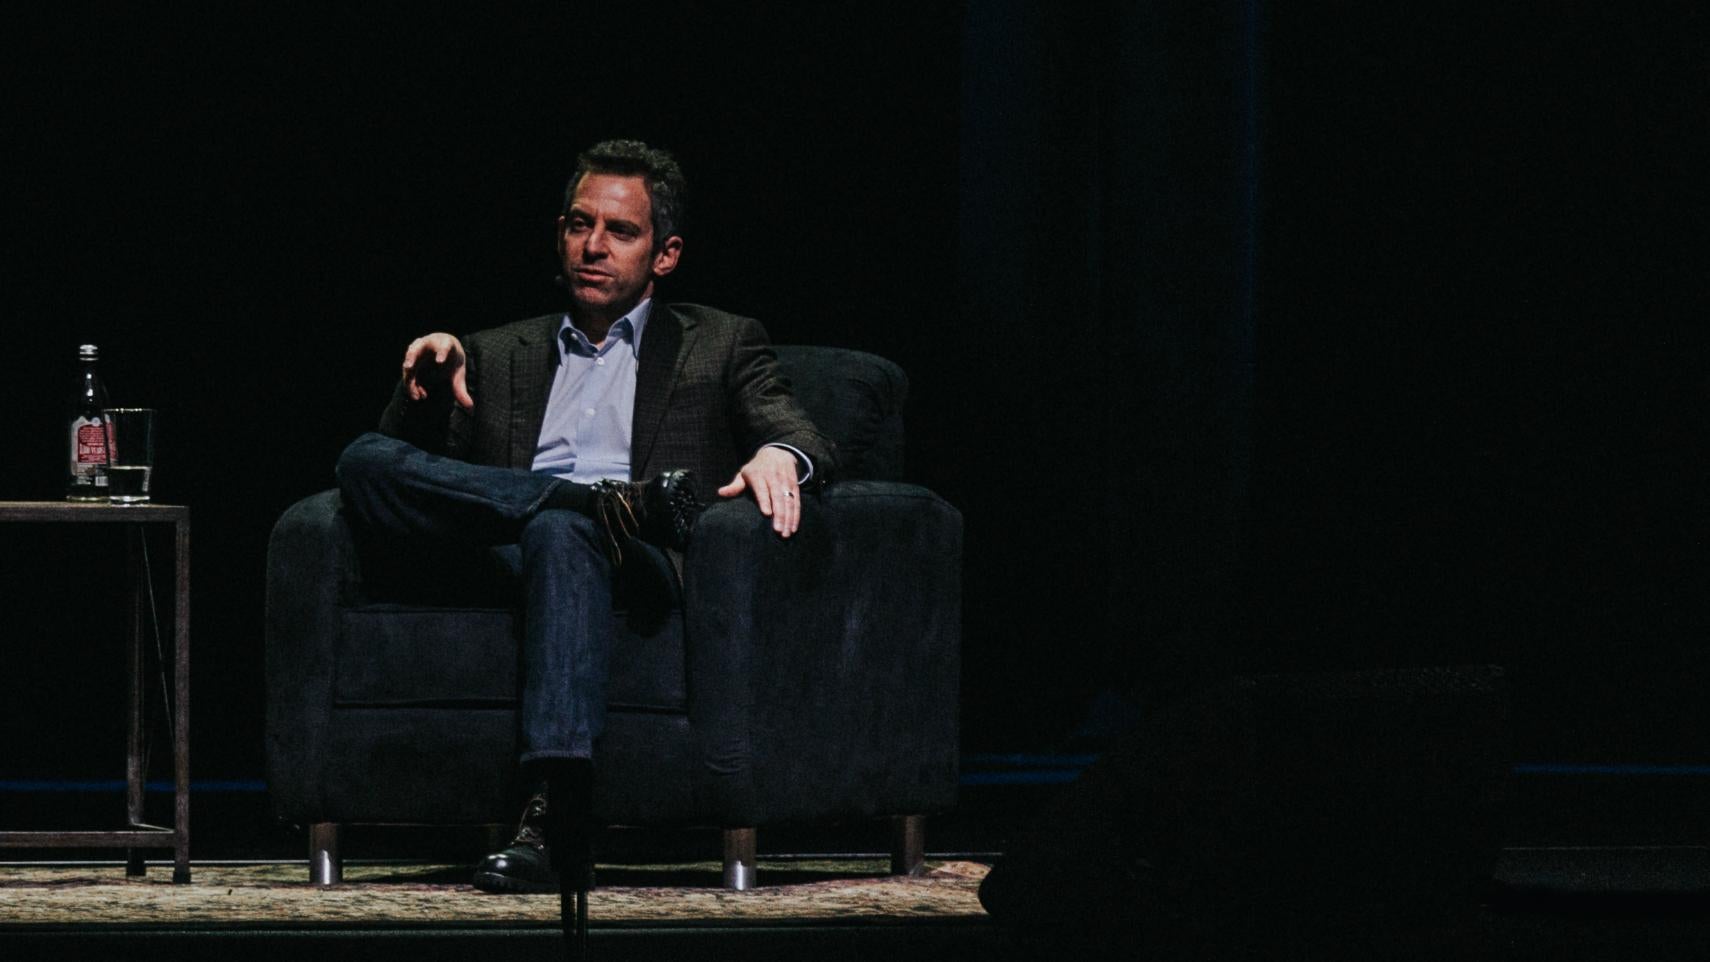 Sam Harris interview: You pay a price for discussing taboo ...